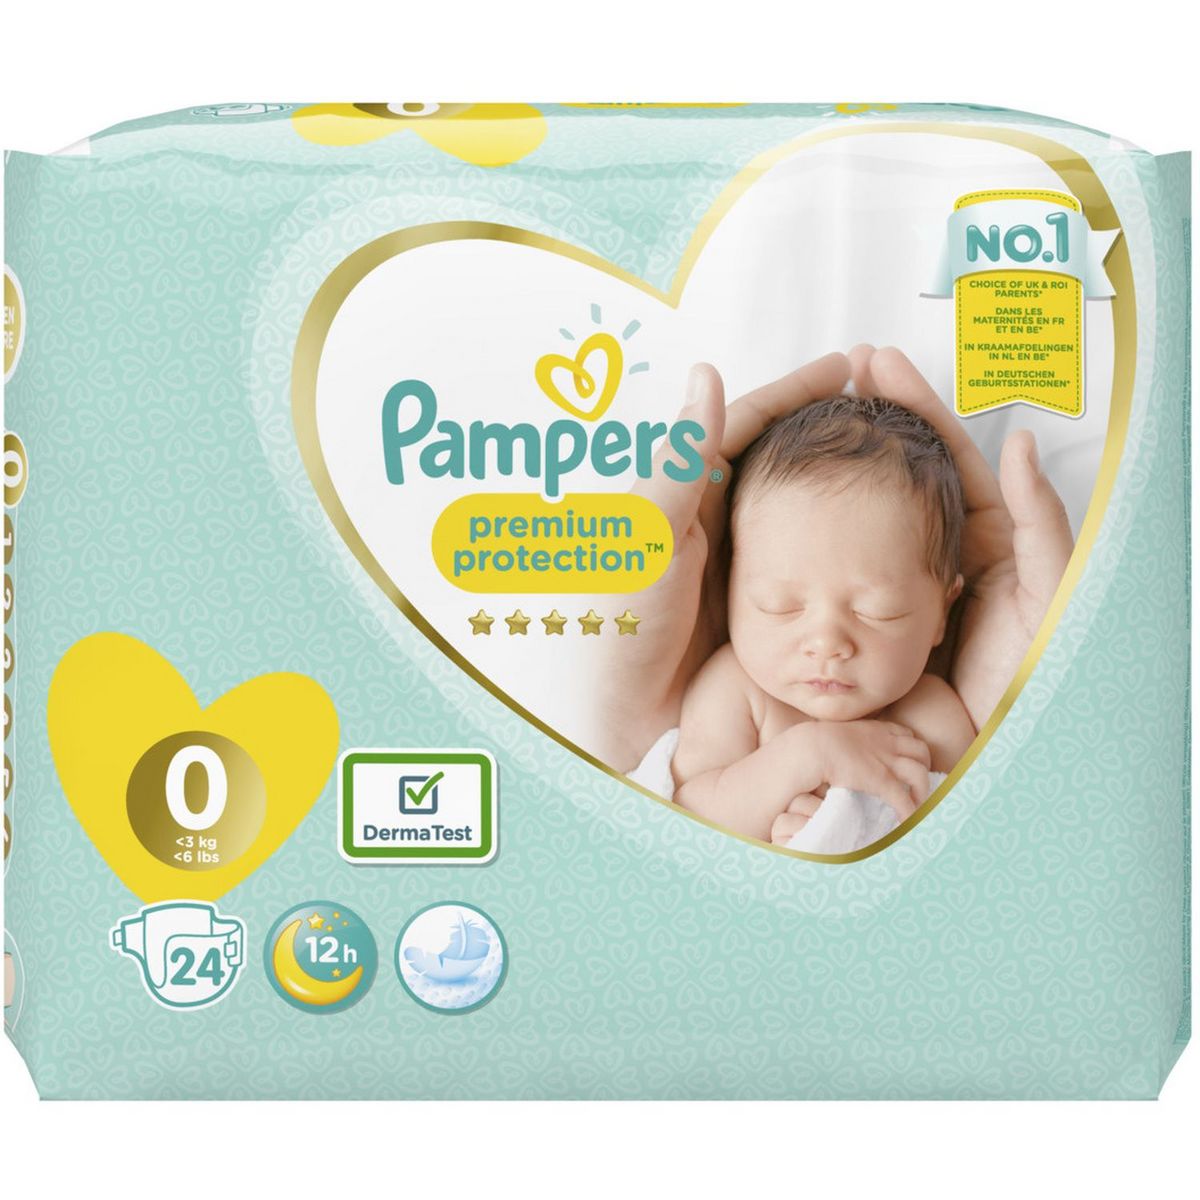 Couche Pampers Premium protection New Baby Micro T0 - 0 à 3 kg - 1